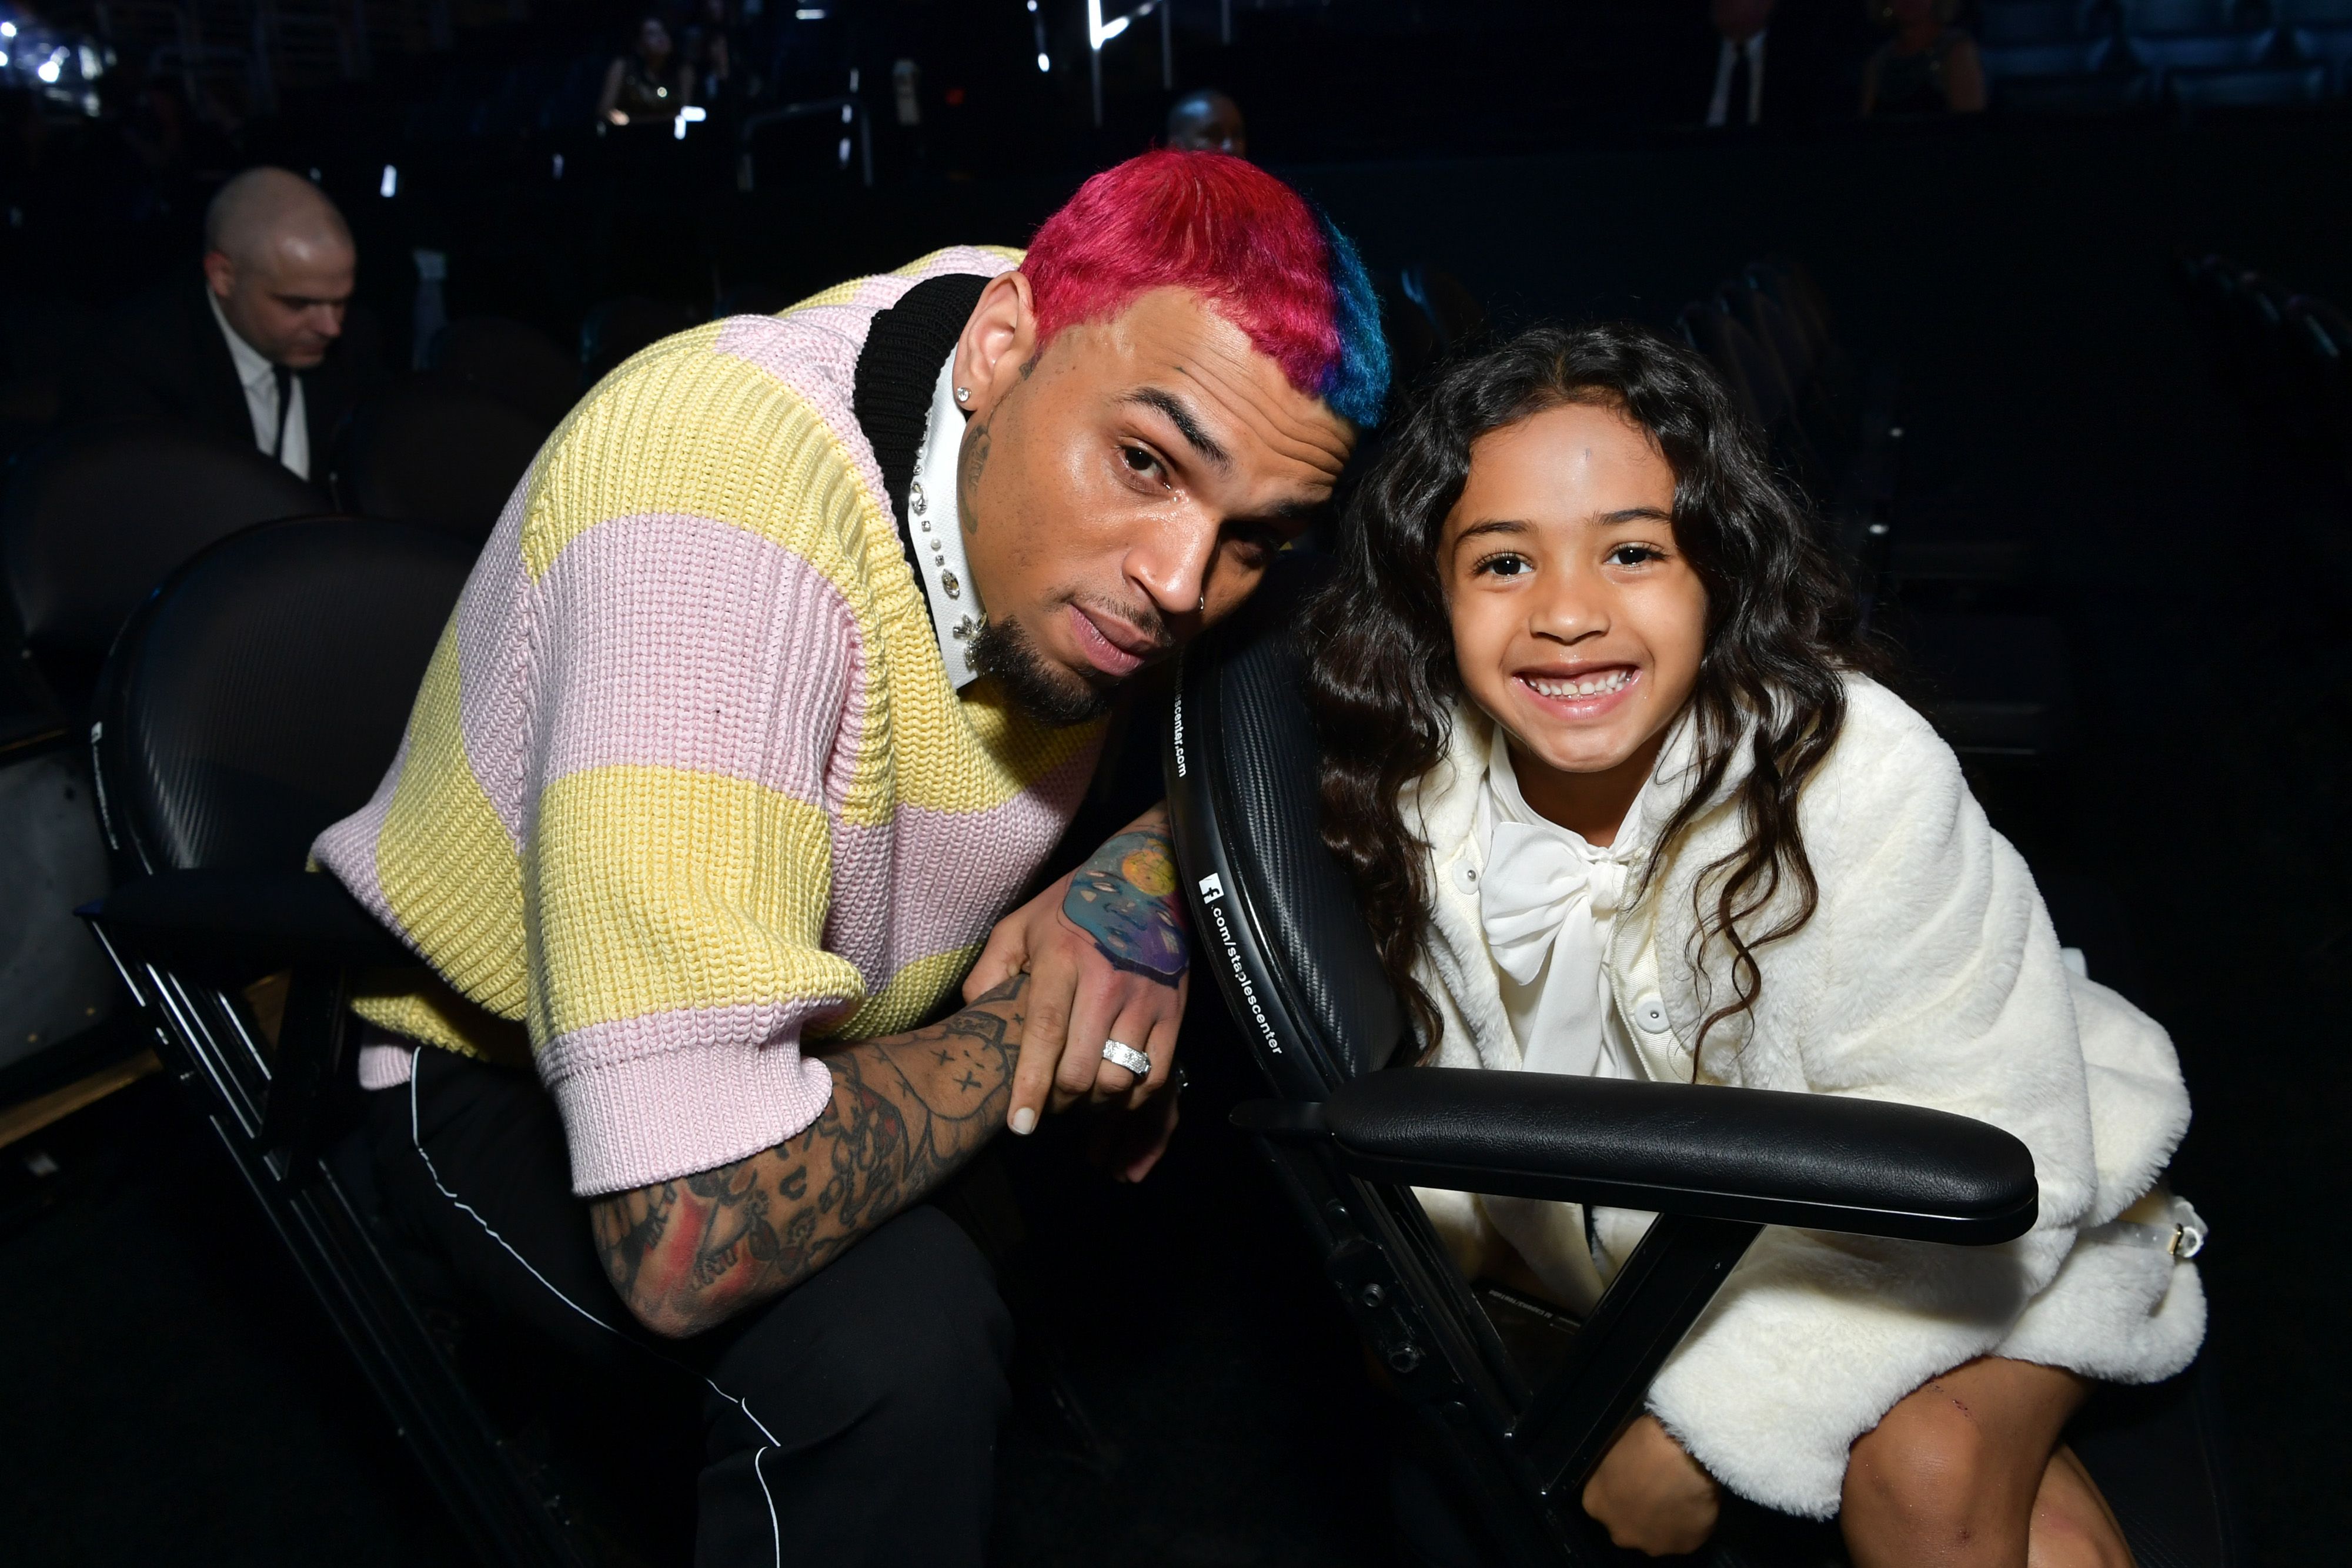 Chris Brown and Royalty Brown attend the 62nd Annual Grammy Awards at Staples Center on January 26, 2020 in Los Angeles, California. | Source: Getty Images